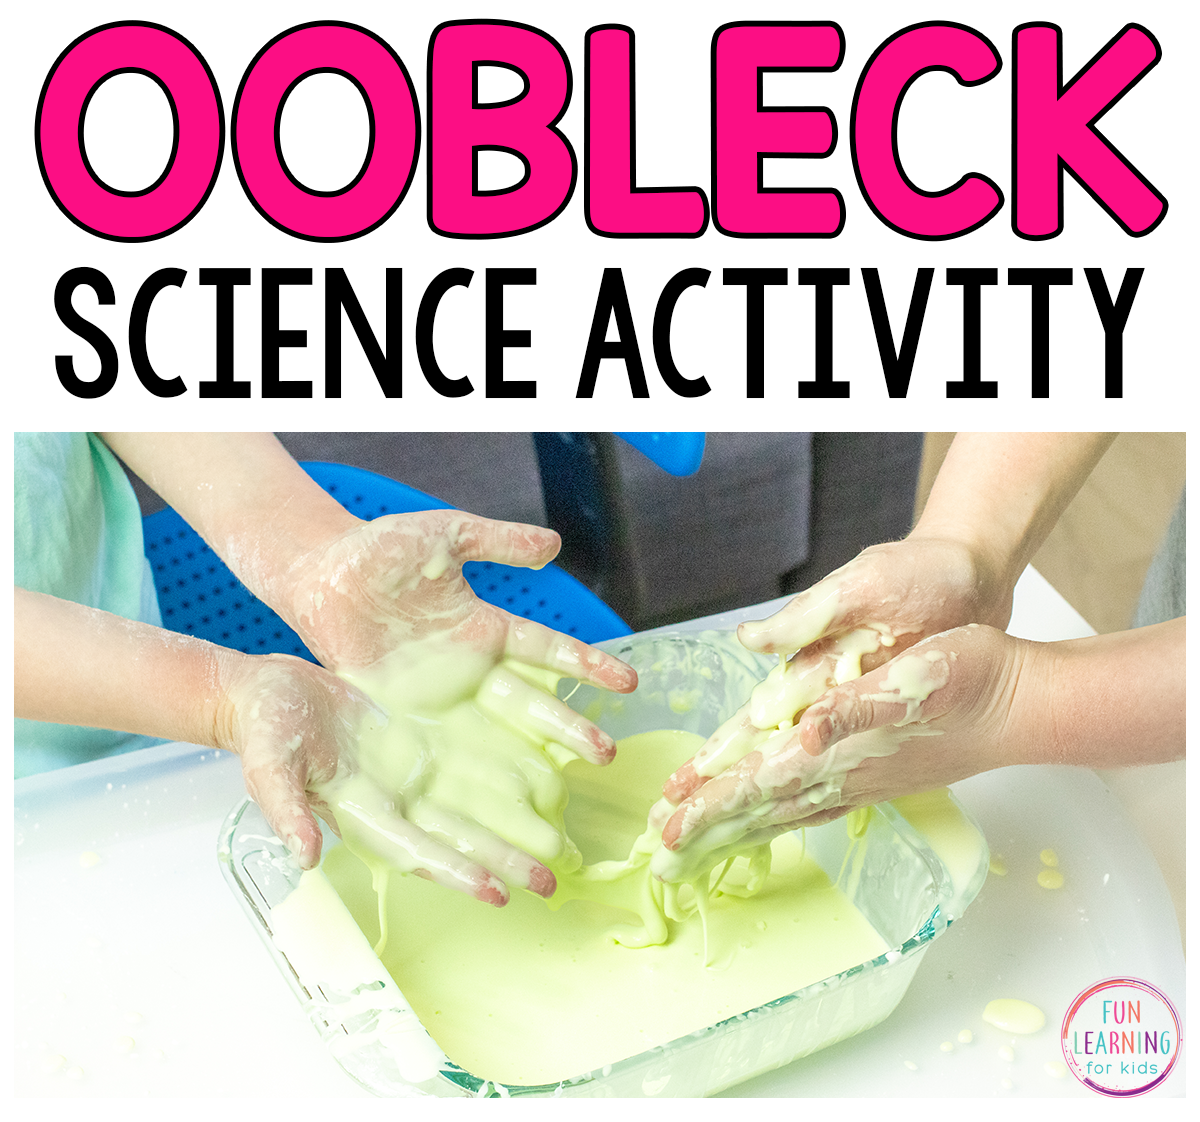 Oobleck Science Activity